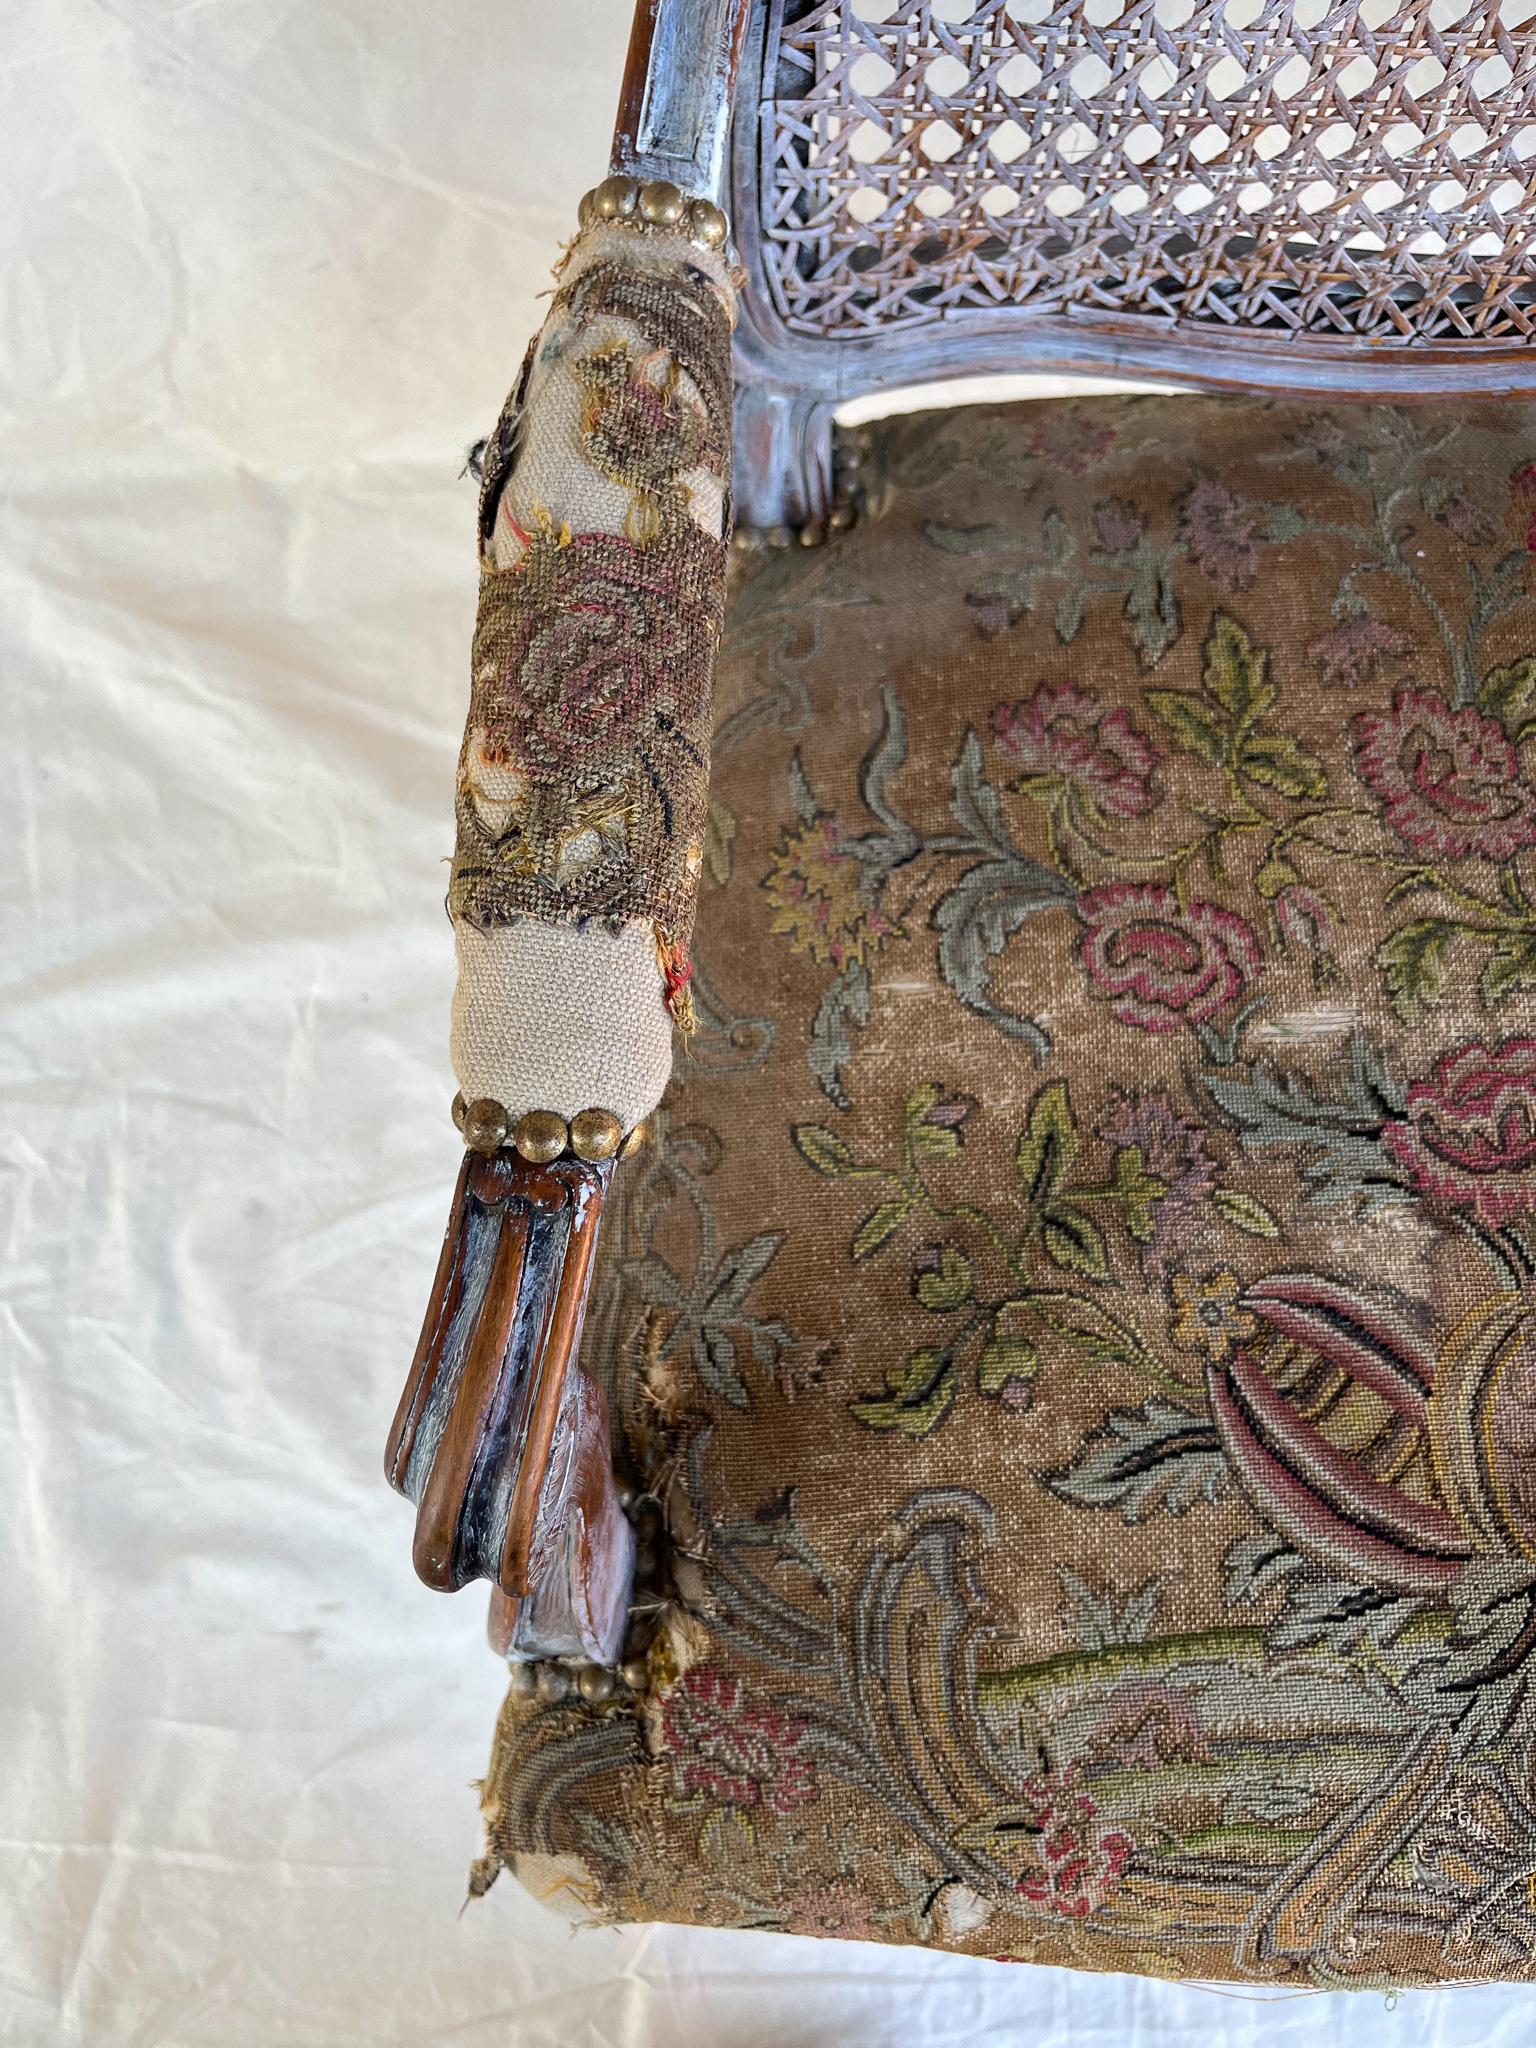 when was straw used in upholstery